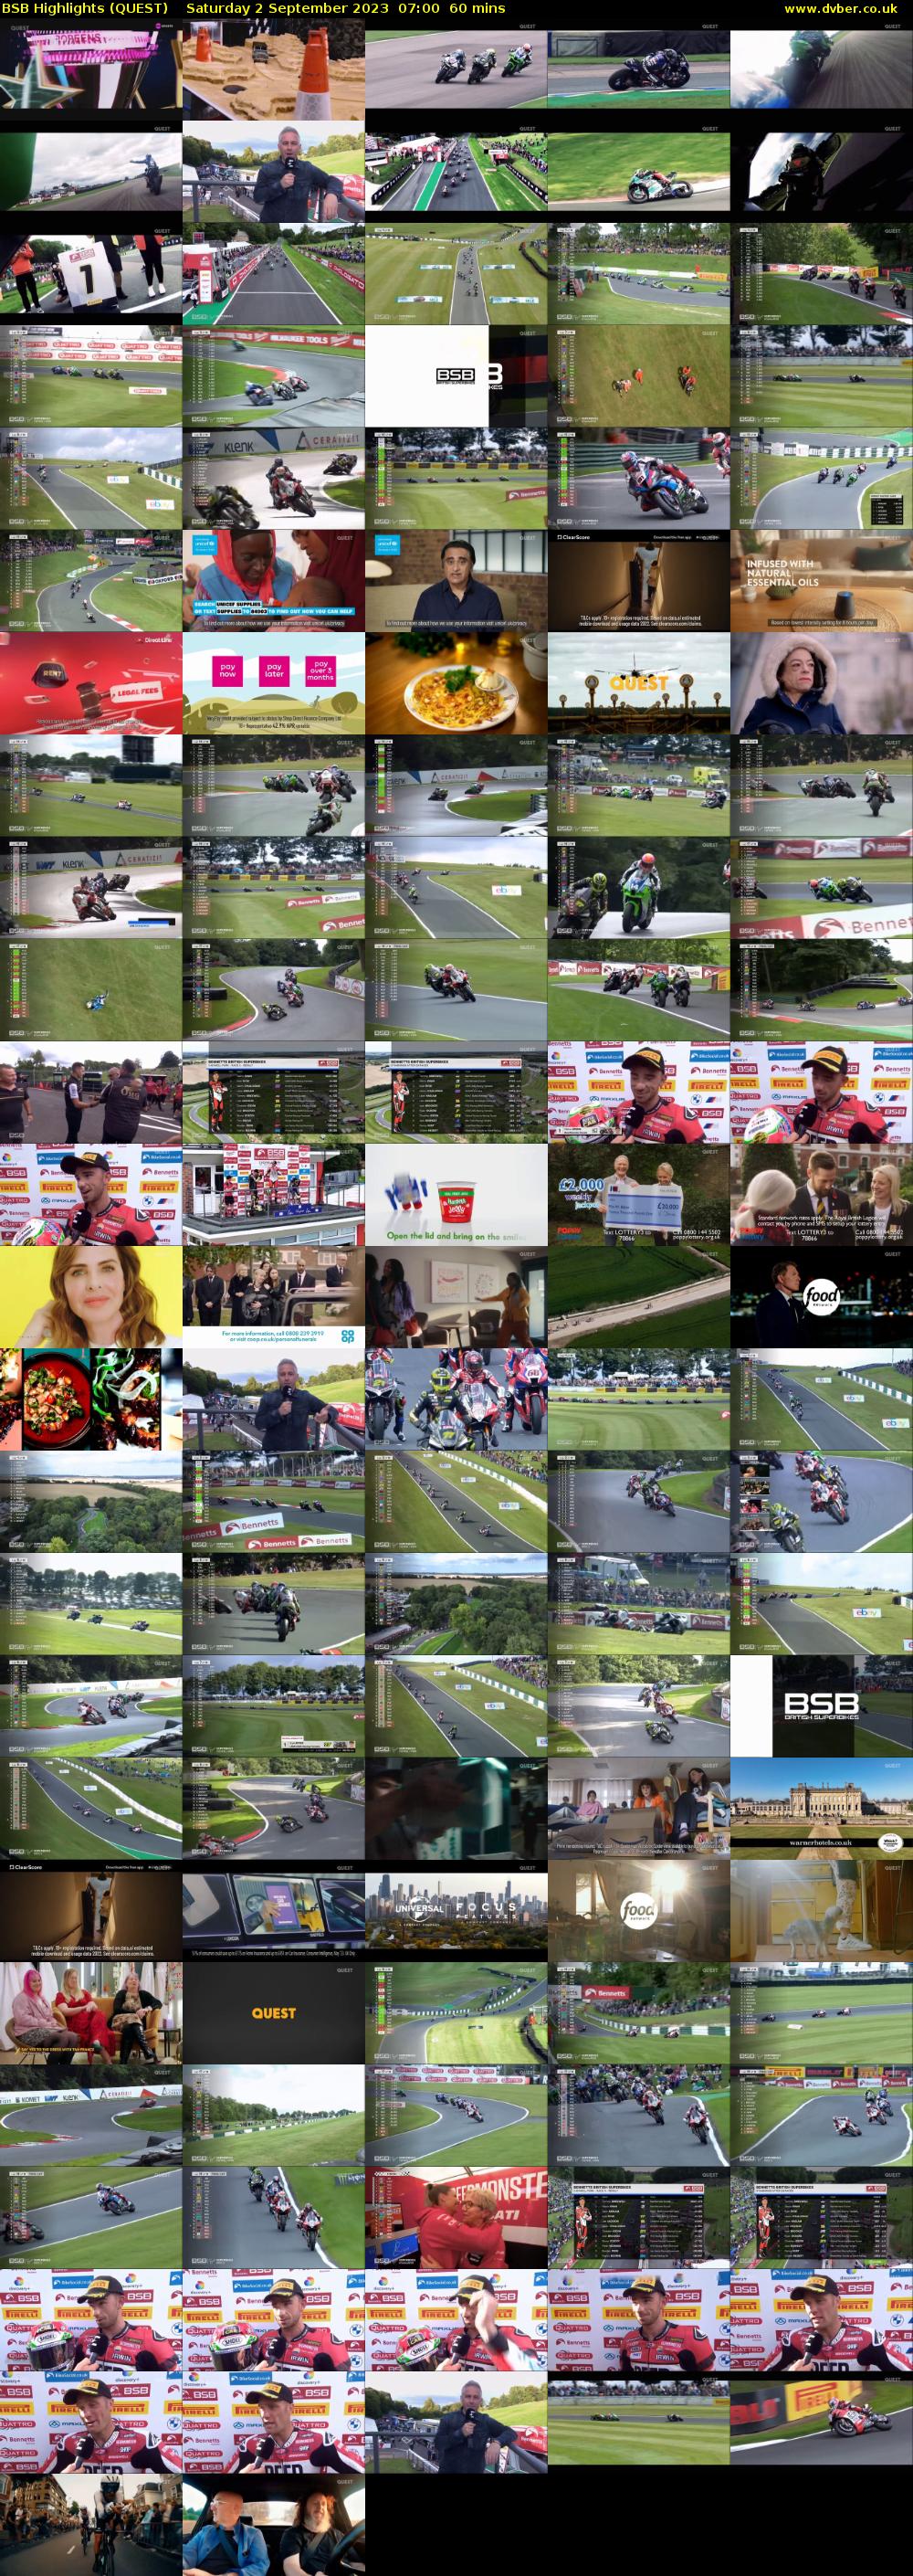 BSB Highlights (QUEST) Saturday 2 September 2023 07:00 - 08:00